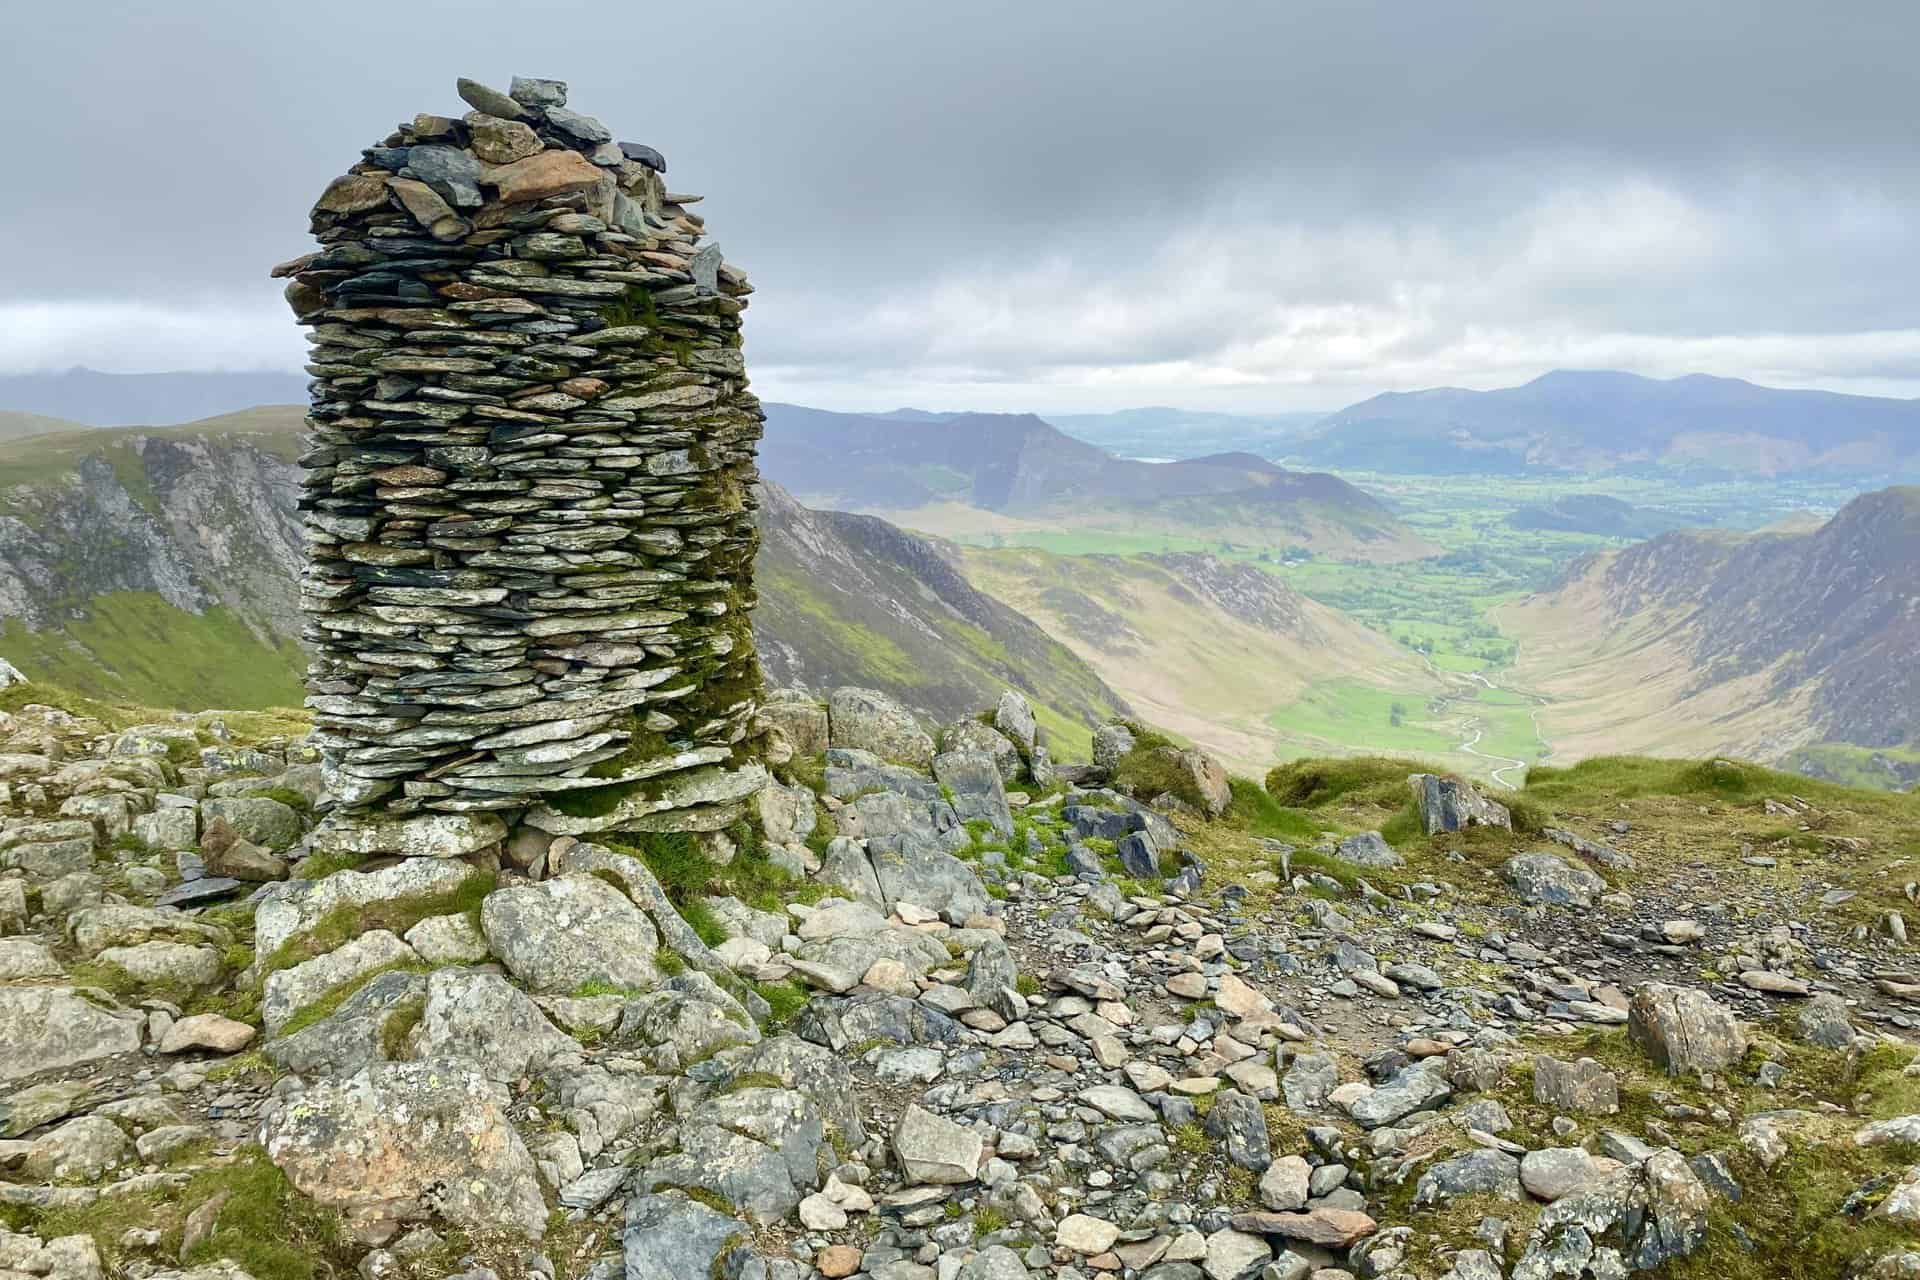 The summit cairn of Dale Head, height 753 metres (2470 feet).